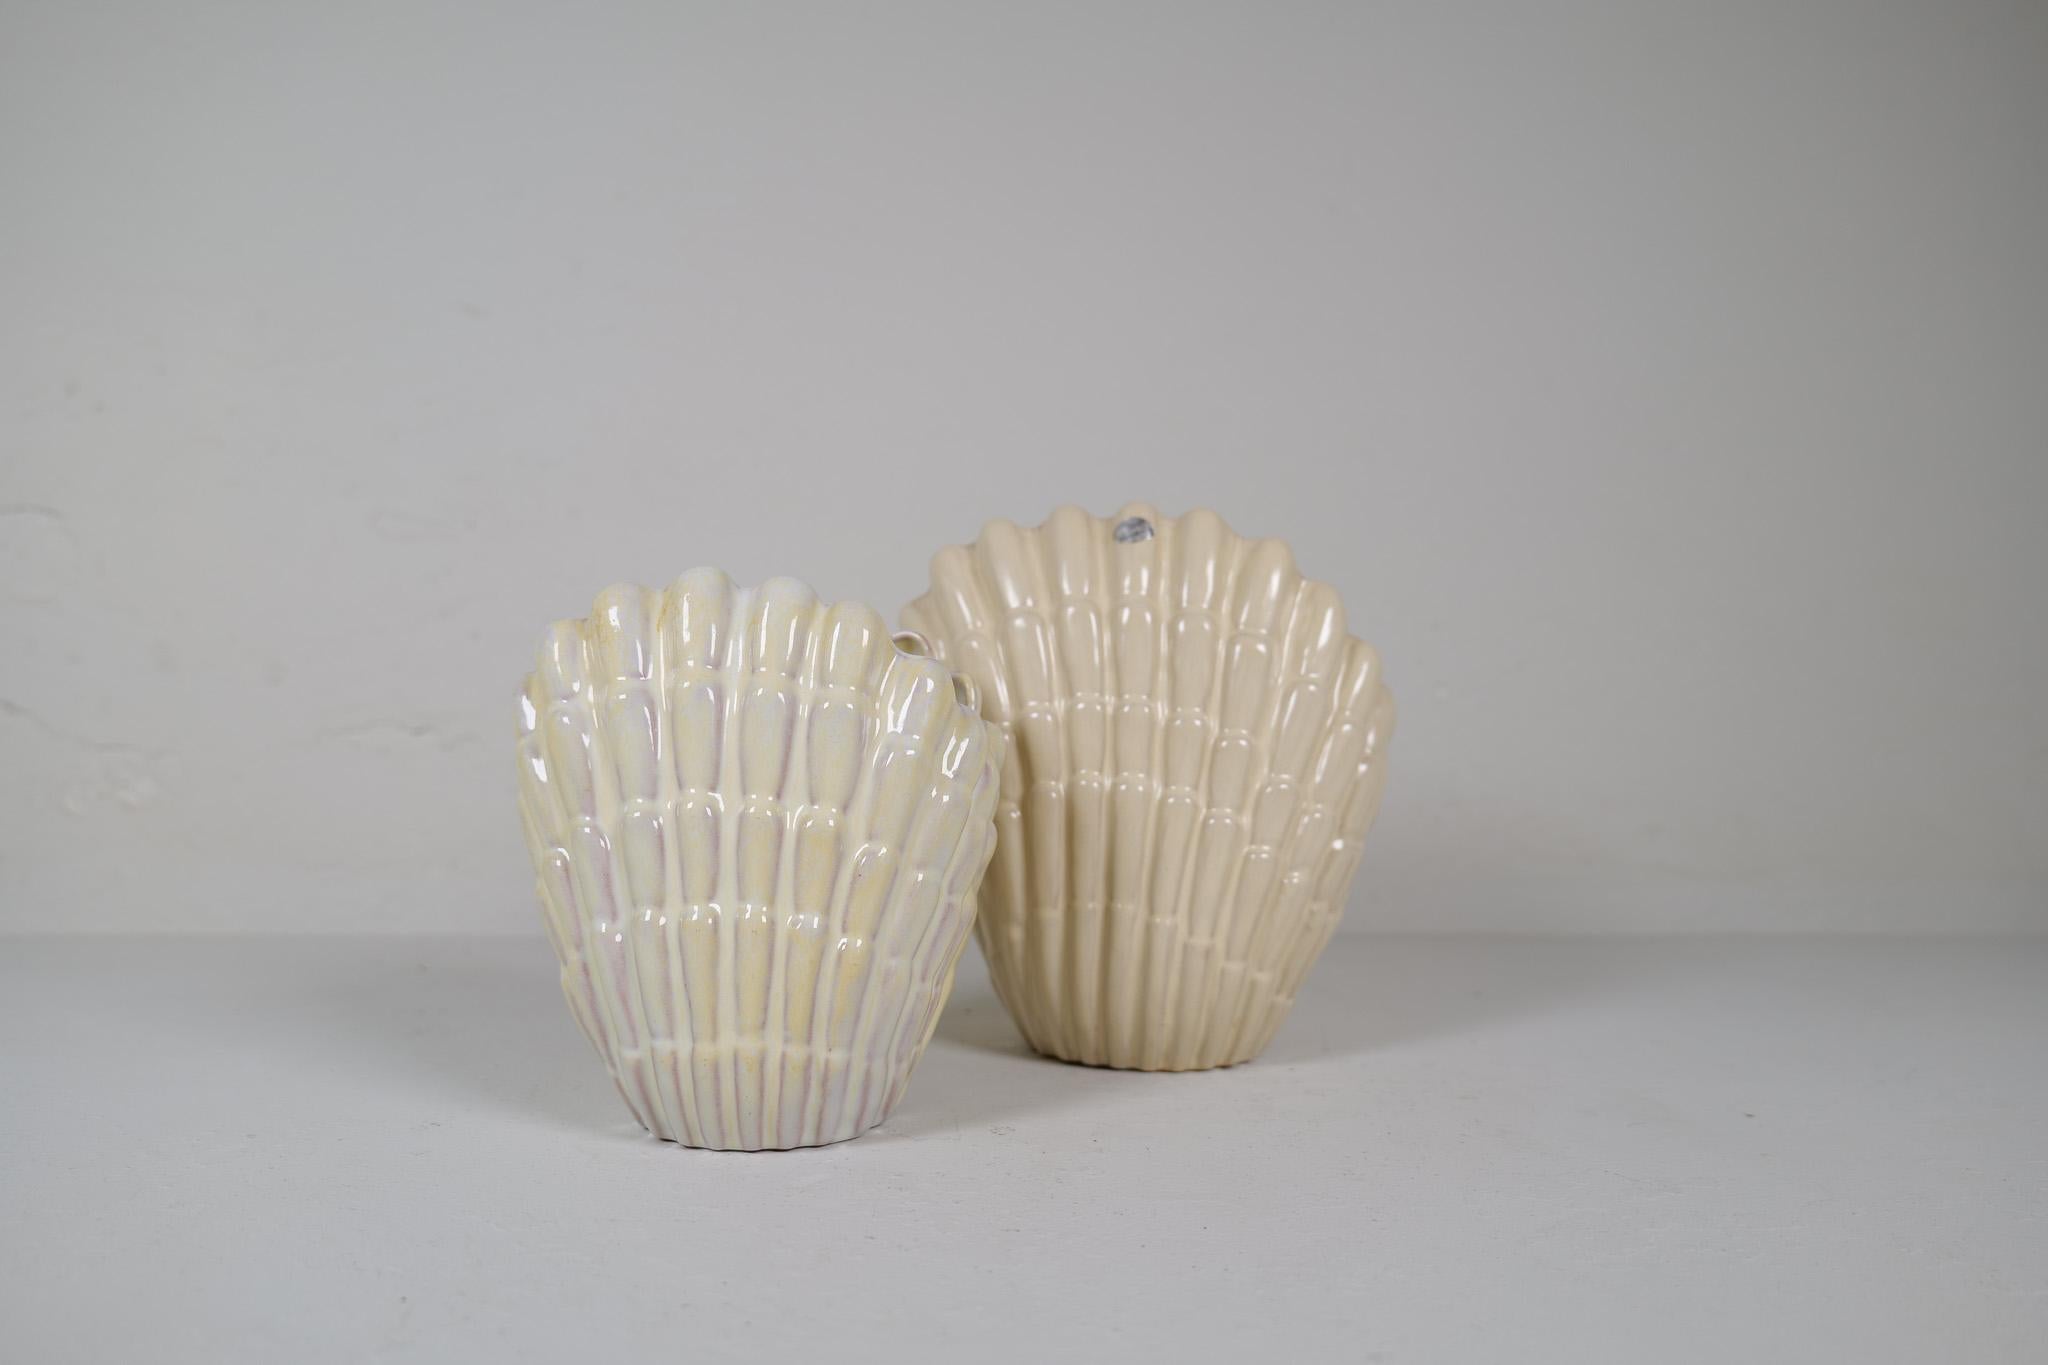 Seashell vases Designed by Vicke Lindstrand for Upsala Ekeby in Sweden during the 1940s. This pair gives a good impression and are a good example of the great craftmanship in Sweden during this time. One large and one smaller version of these vases.